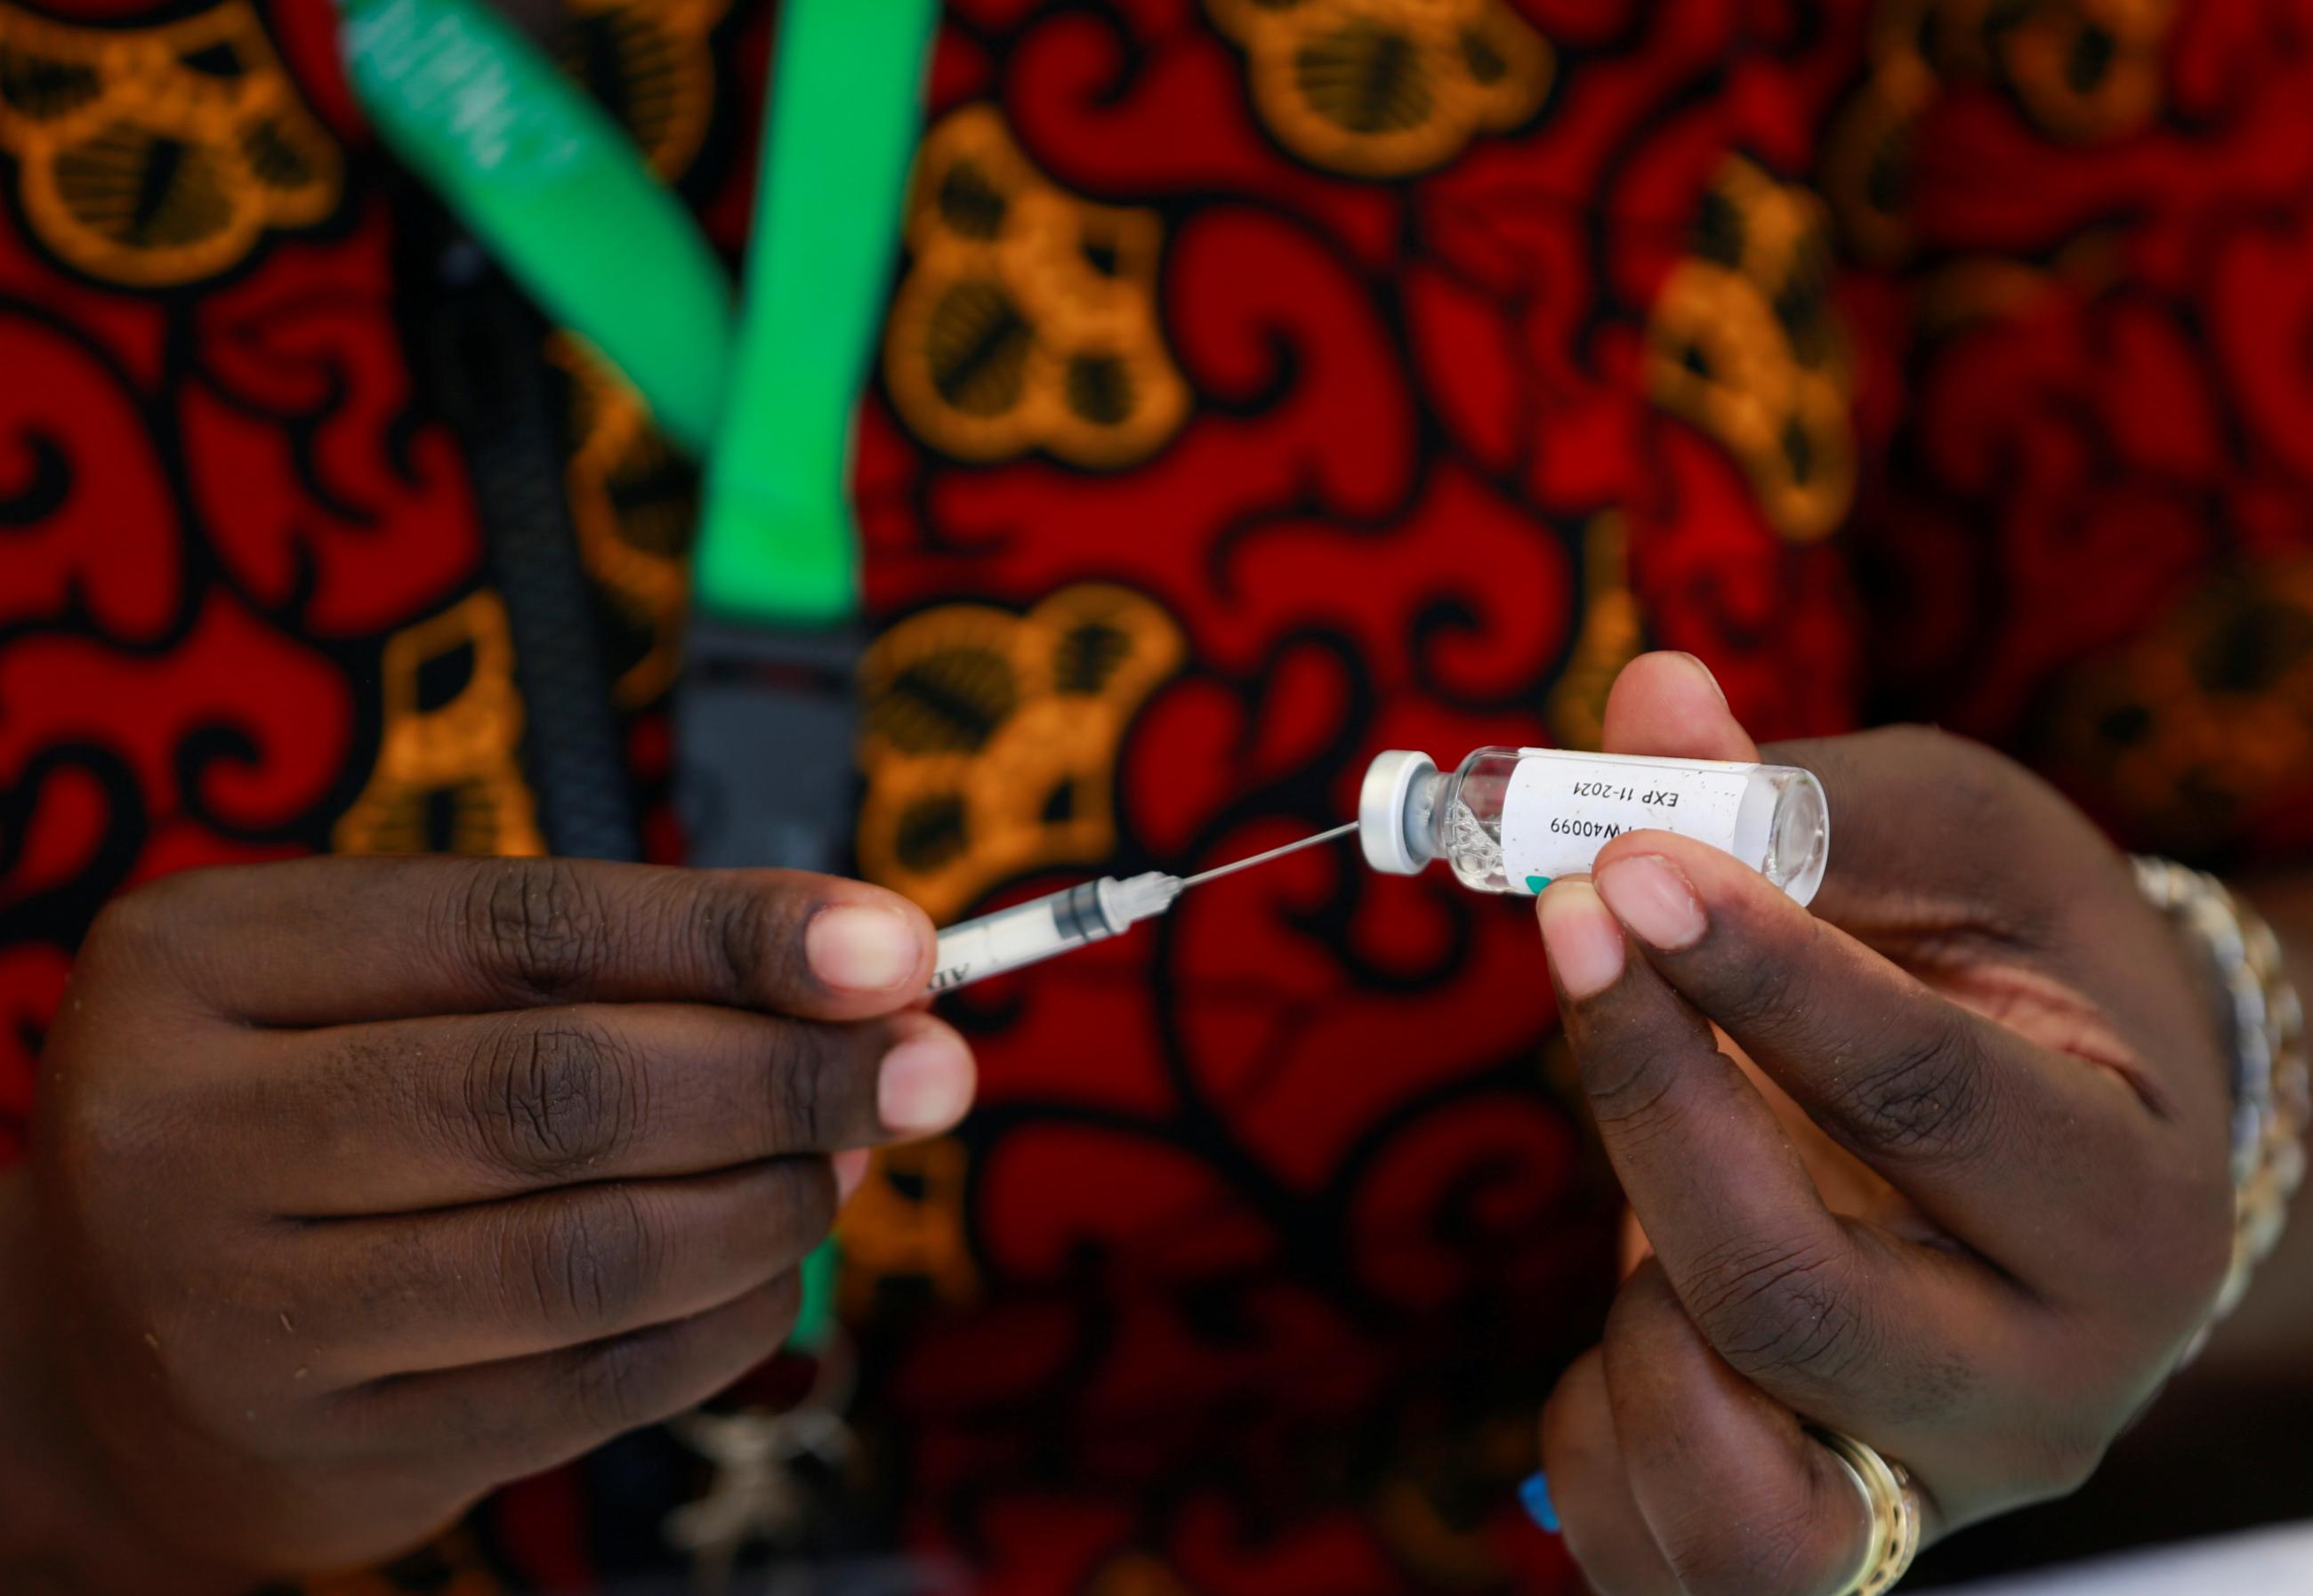 The hands of a health worker are seen as they take a COVID-19 vaccine dose from a vial during a vaccination event in Abuja, Nigeria, November 19, 2021. 